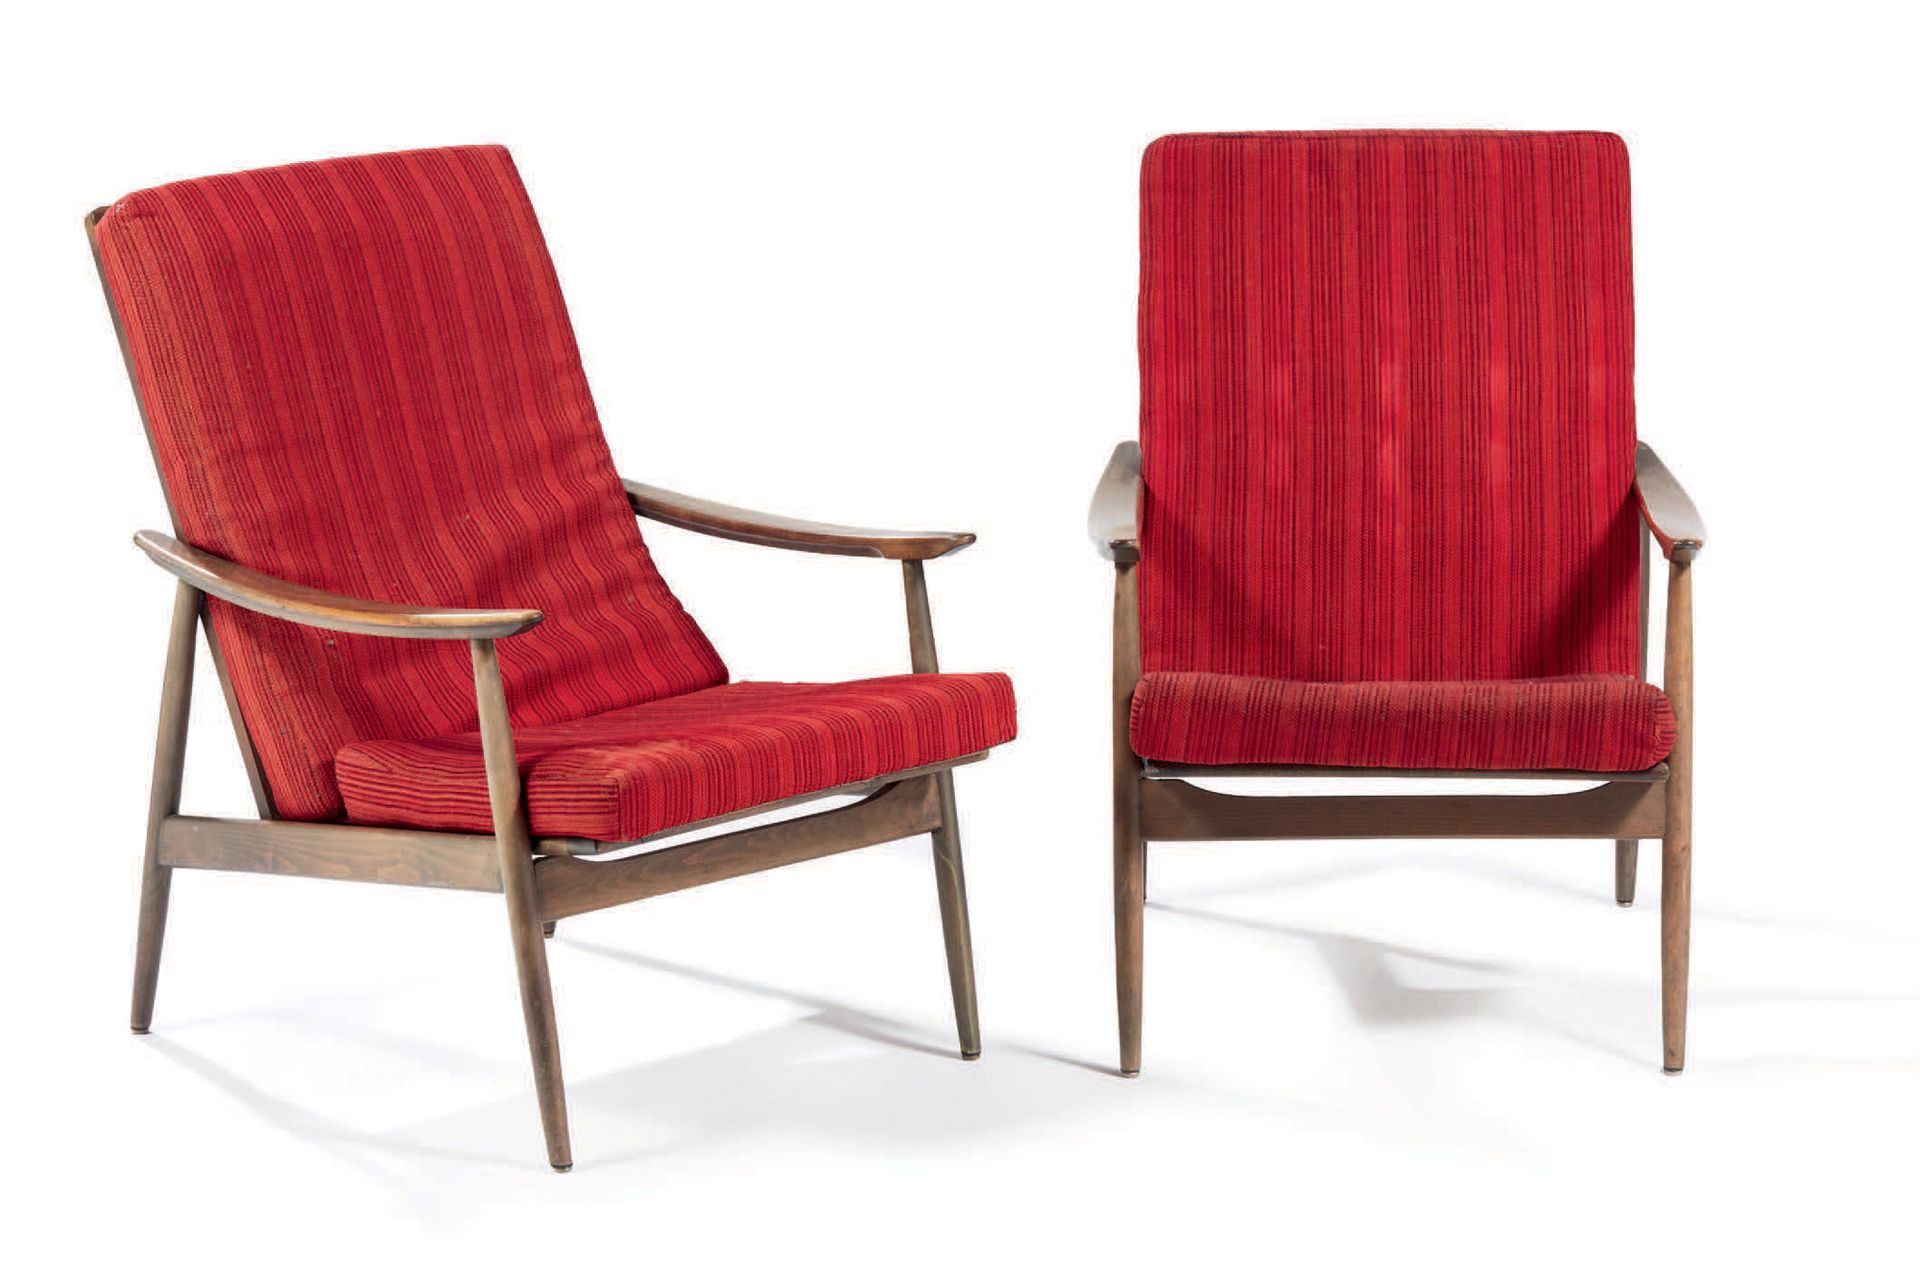 TRAVAIL SCANDINAVE Pair of stained wood armchairs, red fabric trim
H : 98 W : 67&hellip;